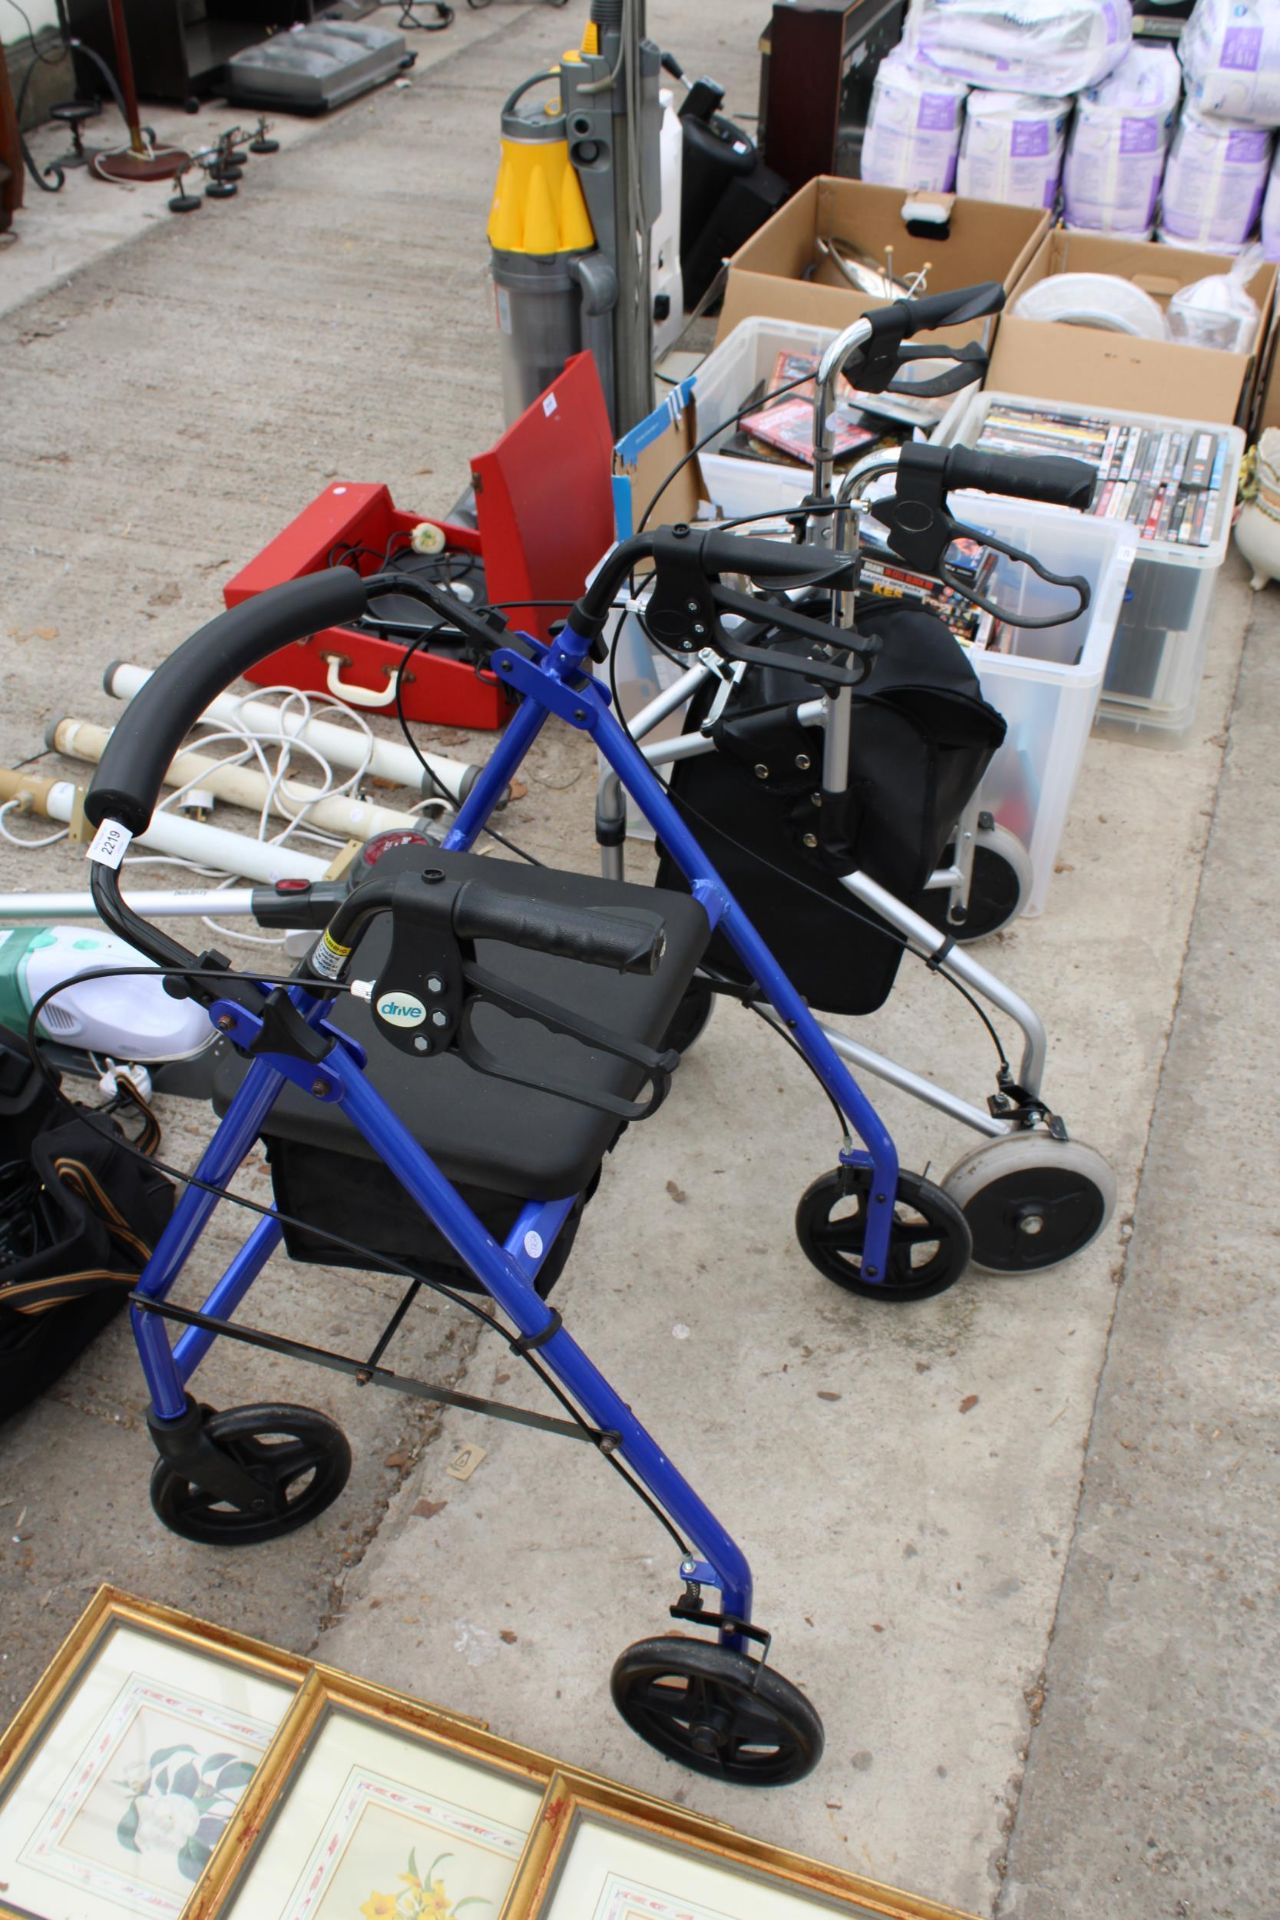 TWO MOBILITY AIDS